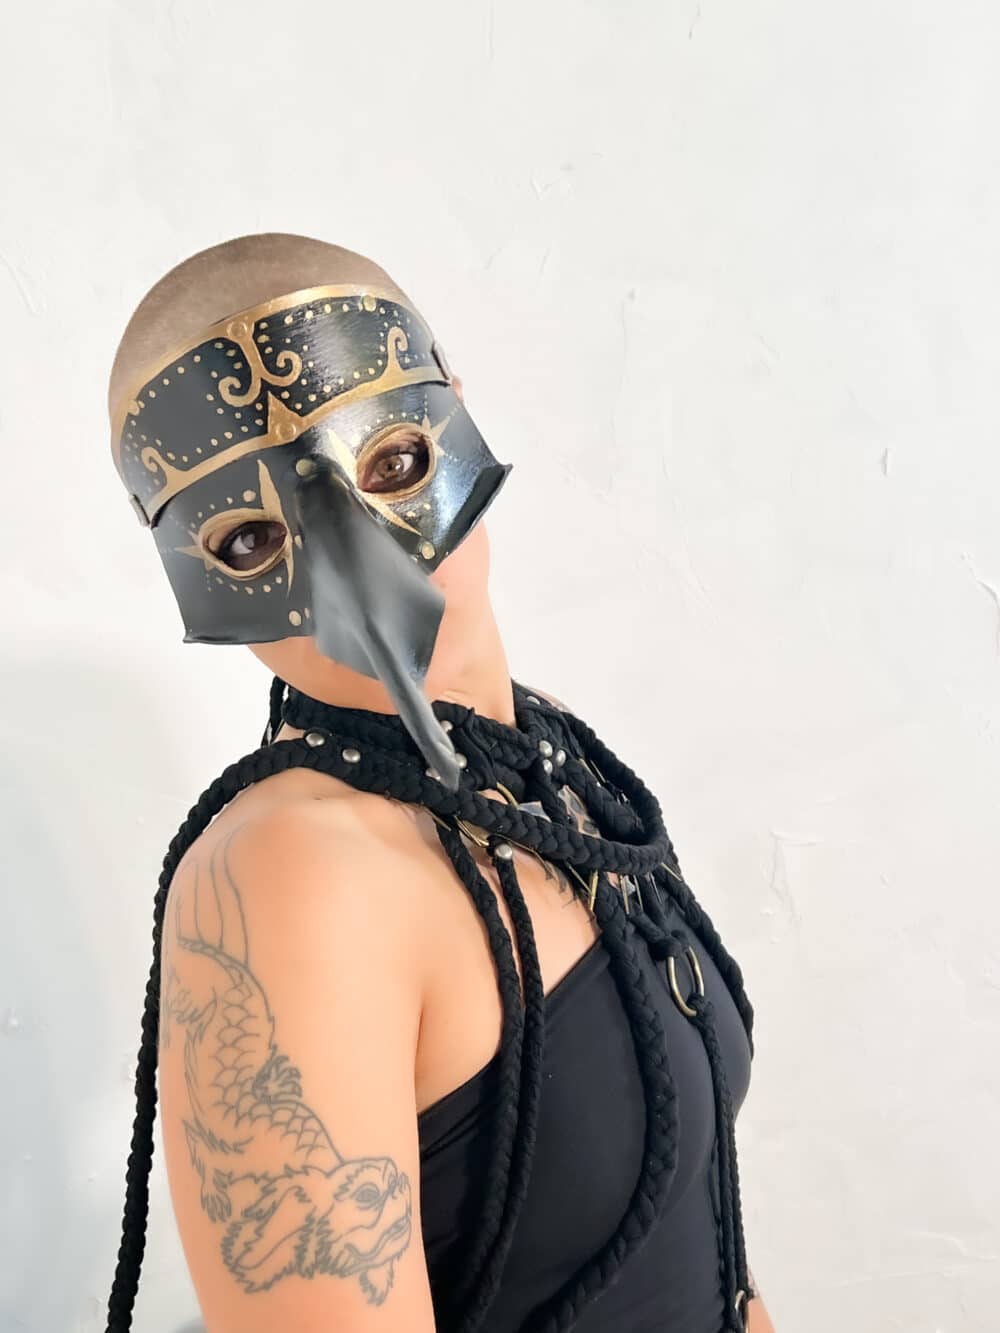 A woman model showcasing a handmade, black leather mask, that has a large beak that extends about 8 inches from the middle of the mask. This mask features eye holes, as well as gold-painted accents.